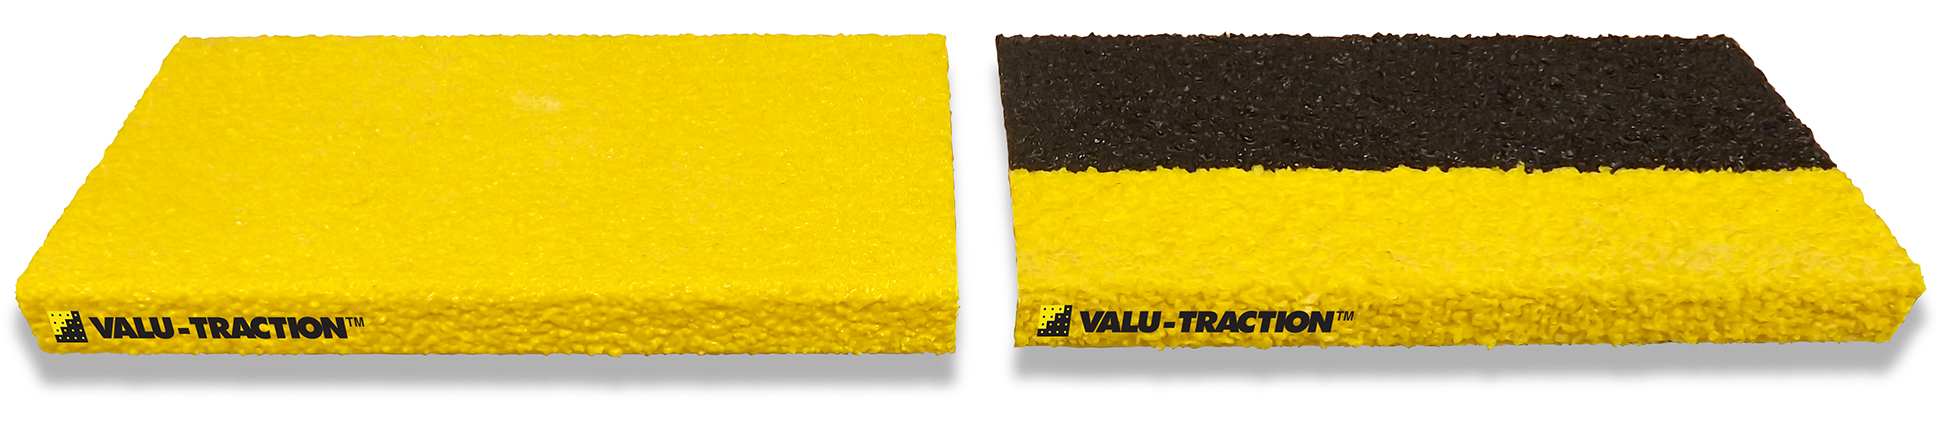 Valu-Traction Non-Slip Step Cover